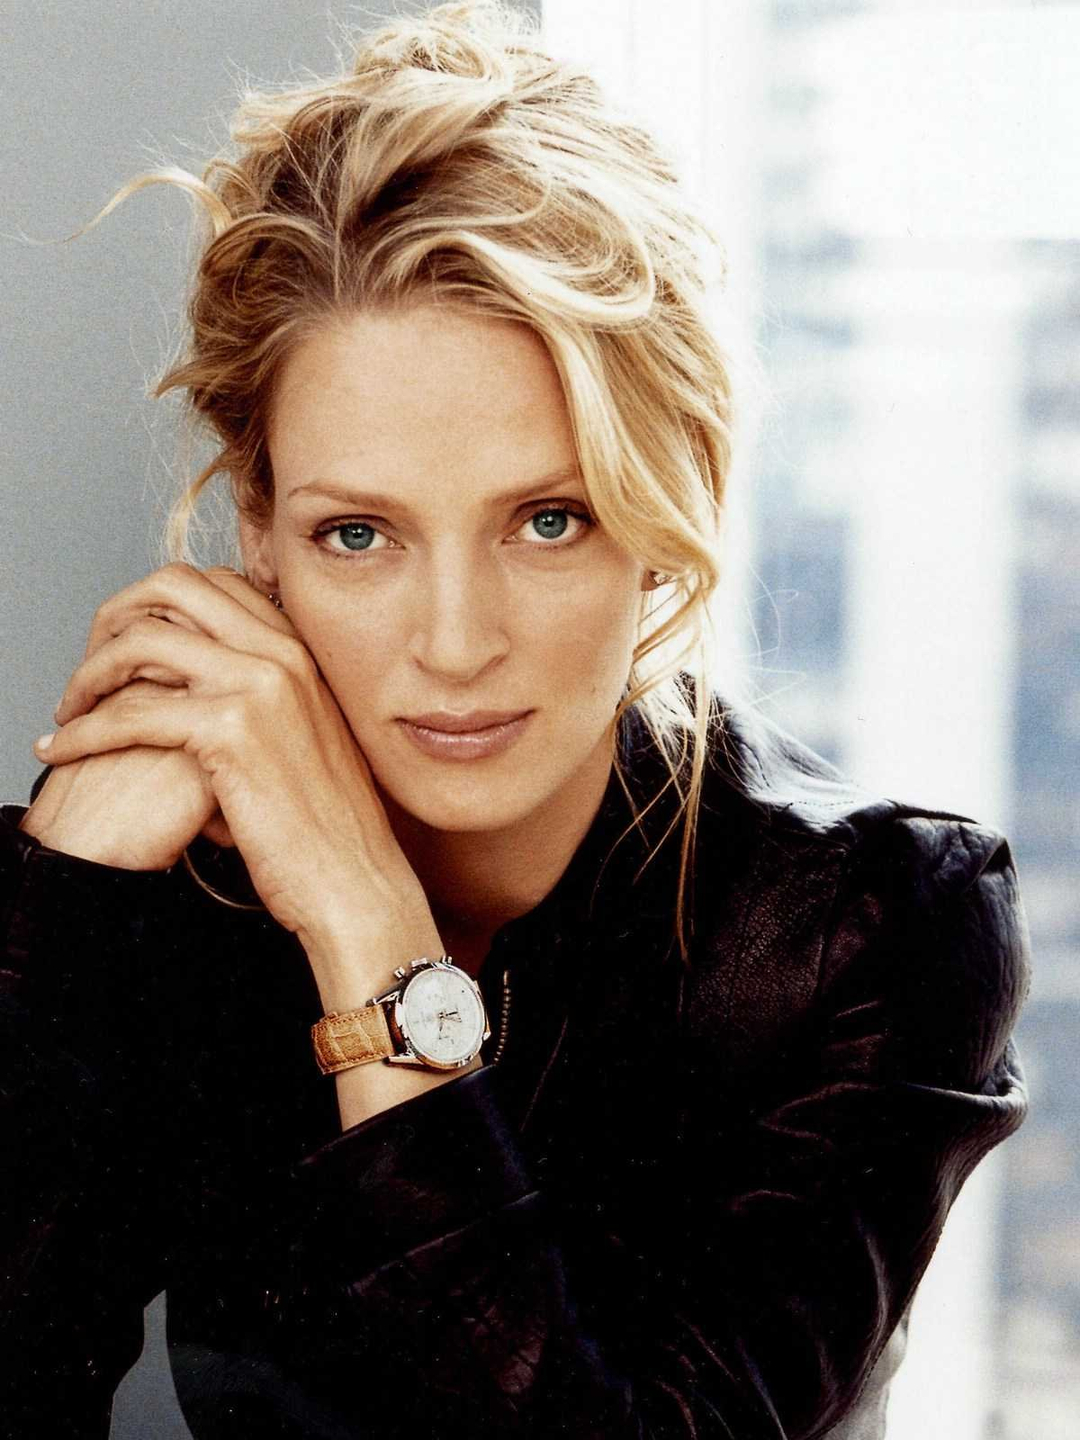 Uma Thurman who is her mother